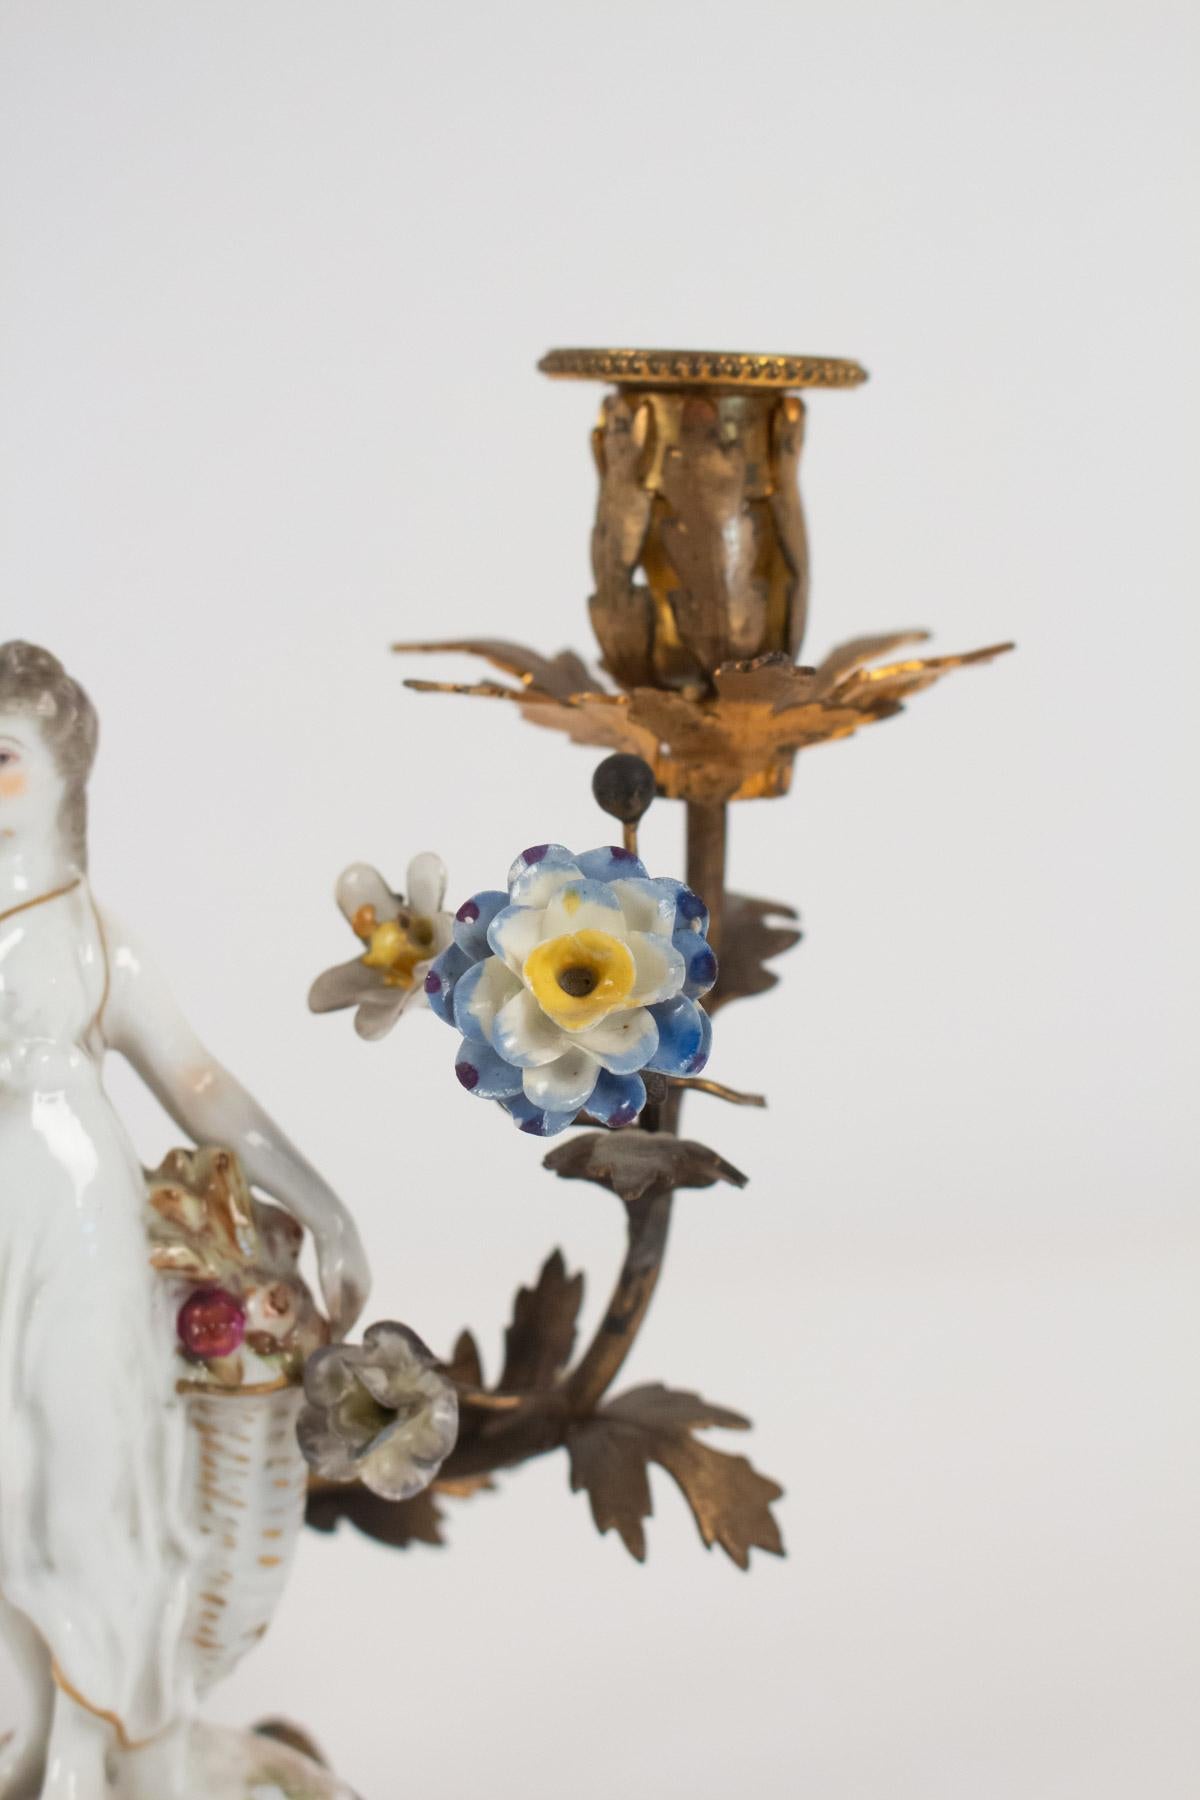 Candlestick in ancient porcelain and gilded metal, 19th century.
Measures: H 20 cm, W 18 cm, W 12 cm.